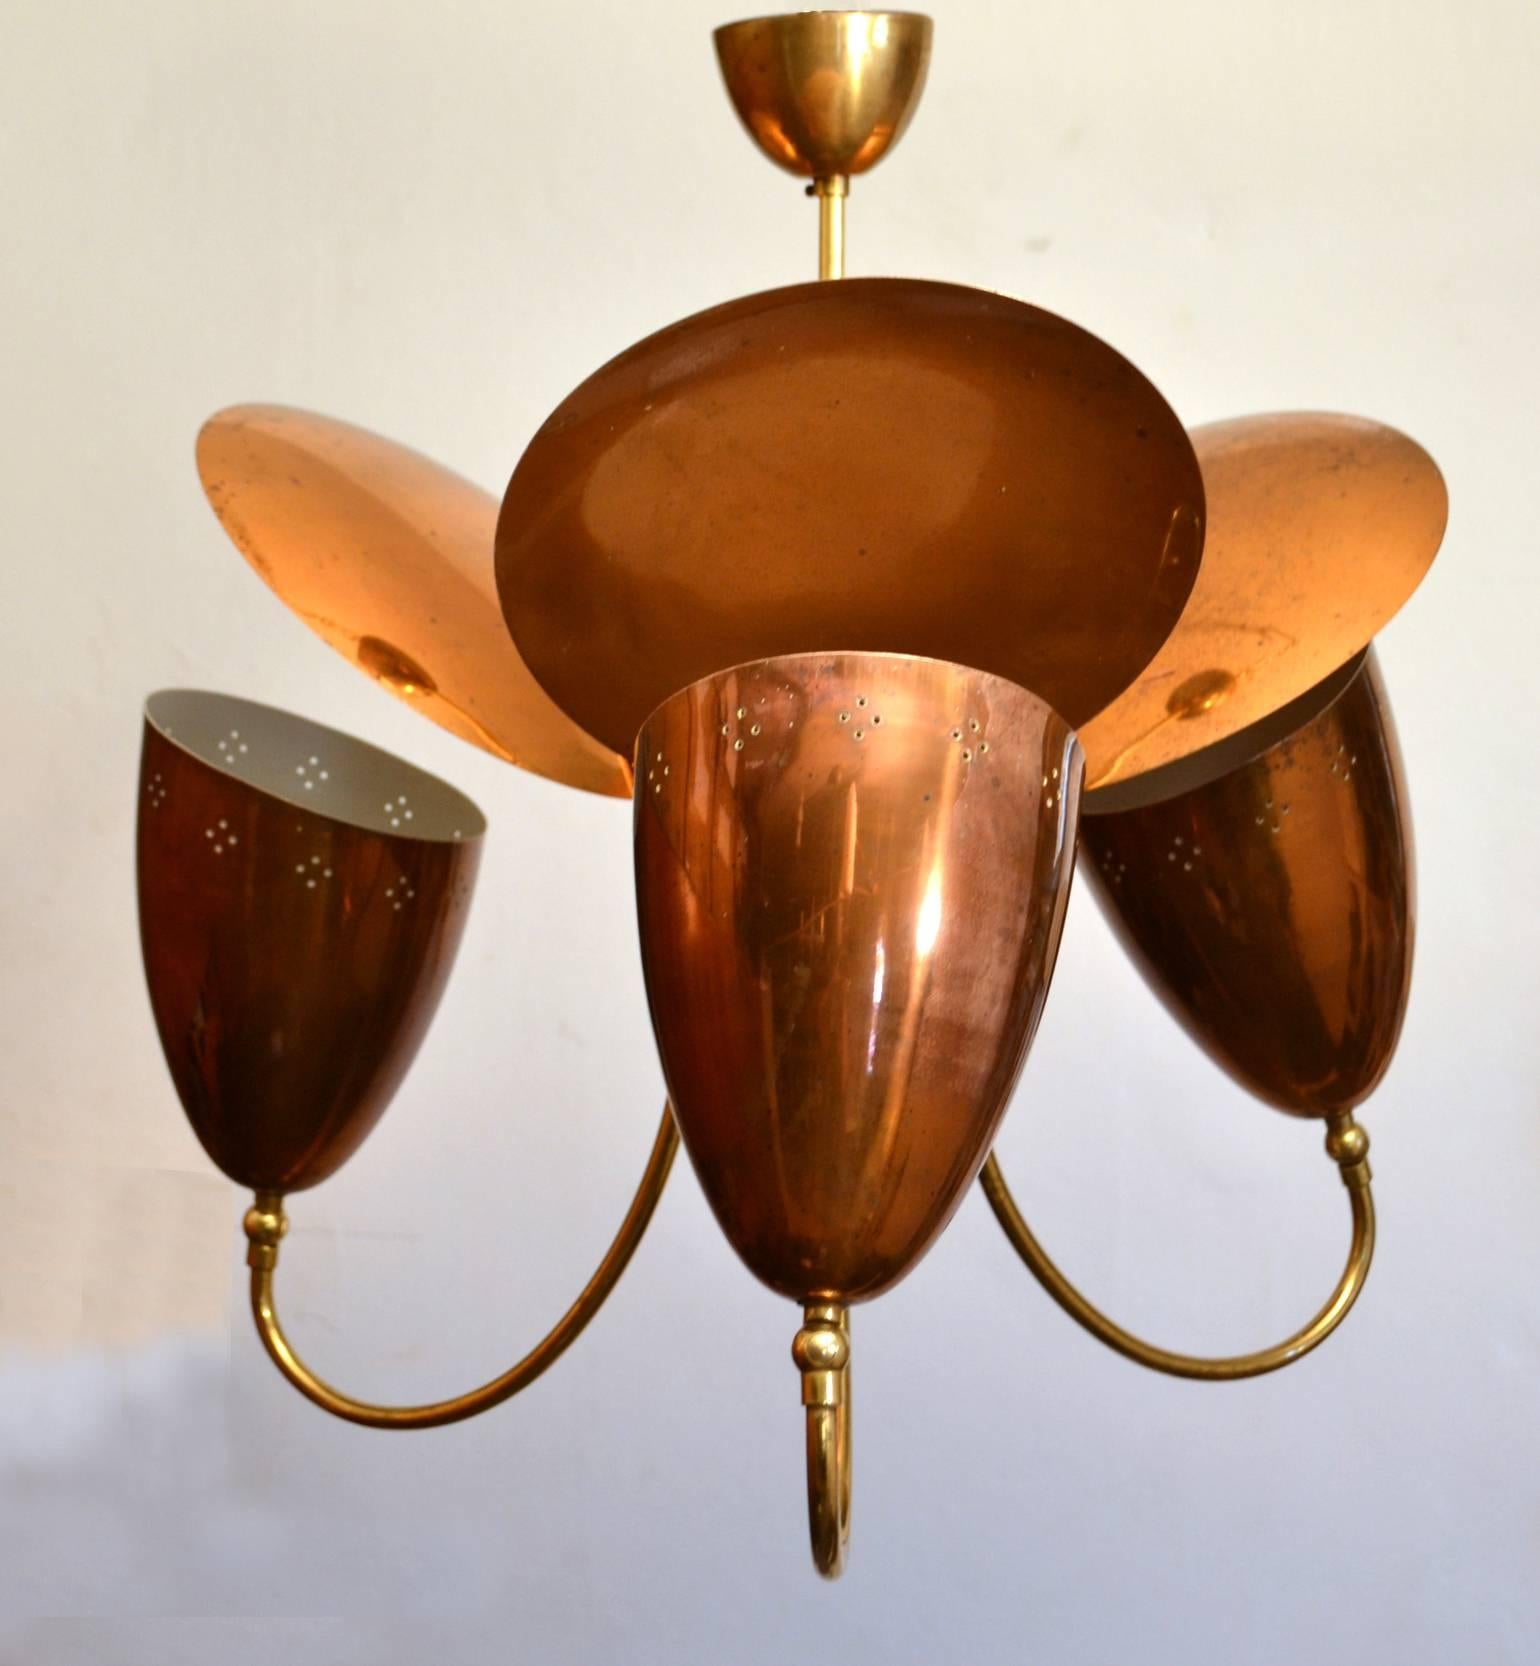 Original and charming three-arm chandelier with three adjustable perforated up-lighter shades in copper and disk-shape reflectors, connected by a brass frame and fixtures.
Similar chandeliers were produced by Lightolier, Angelo Lelli for Arredoluce